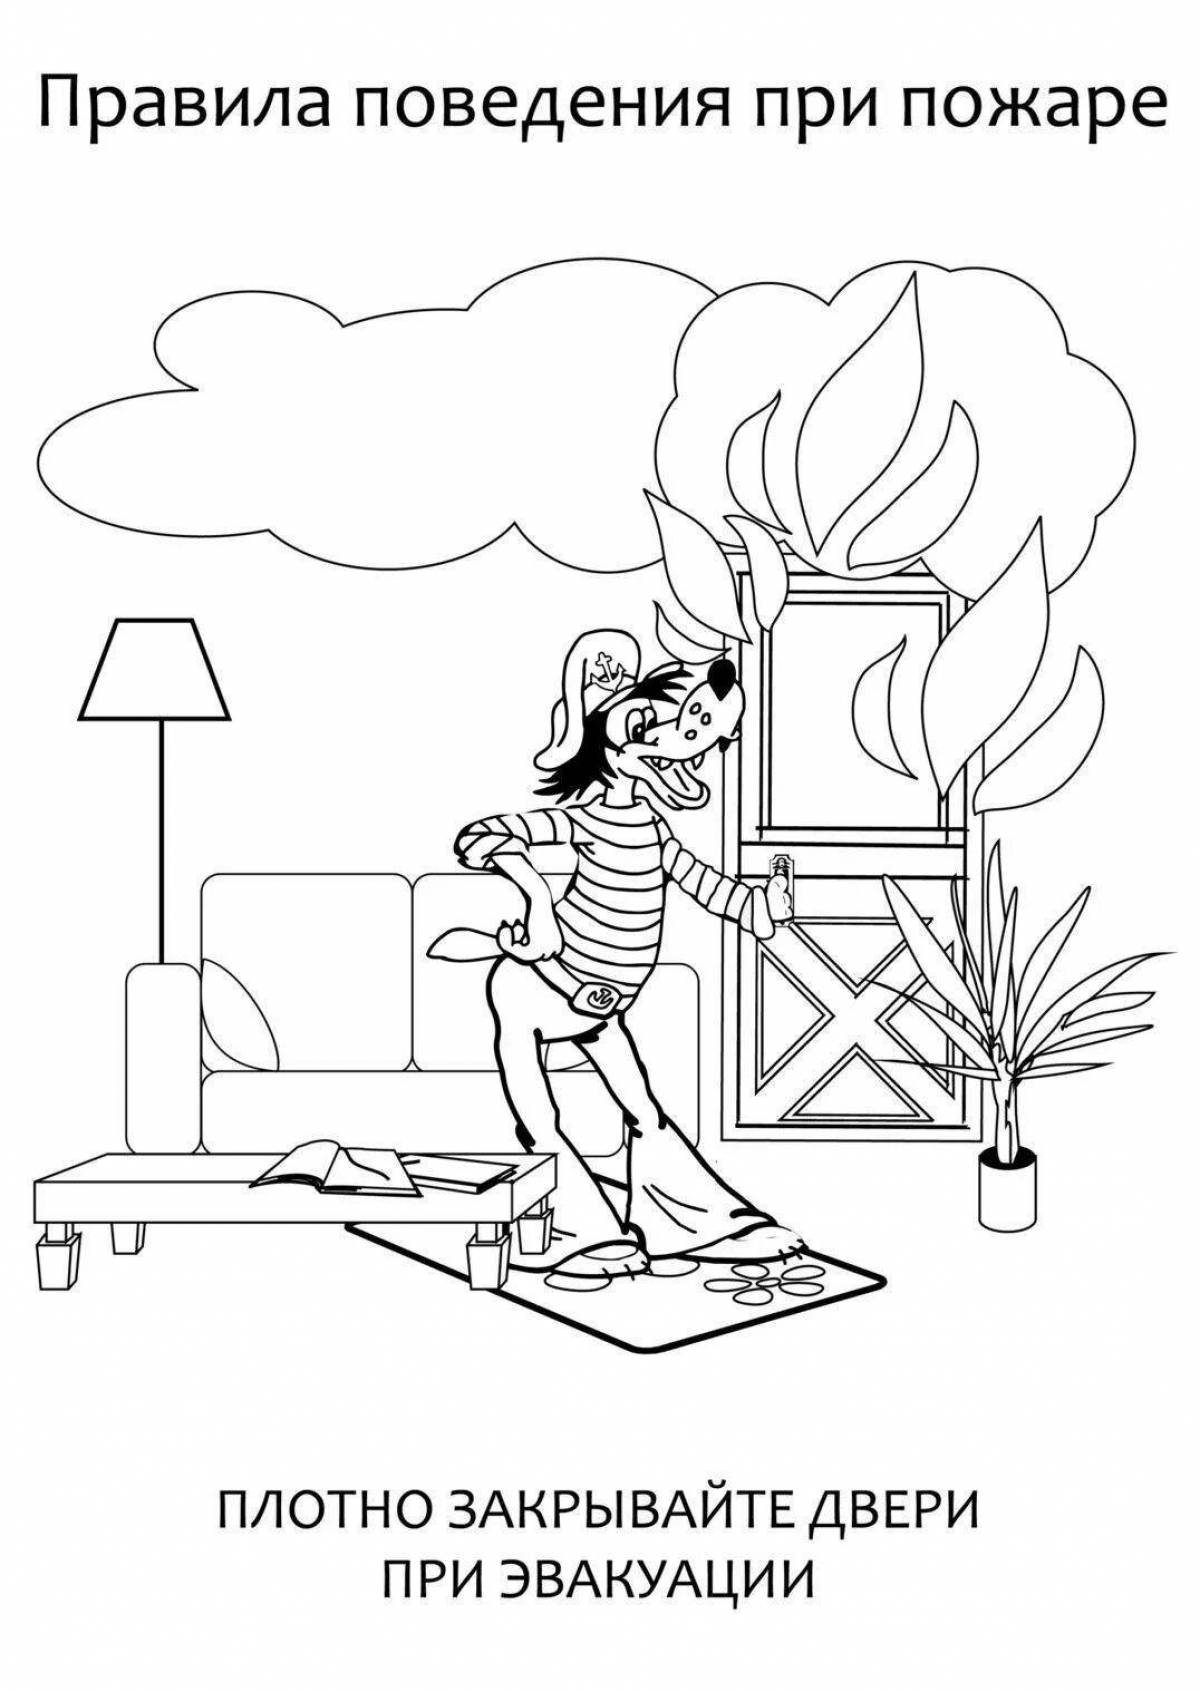 A fun fire safety coloring book for 5-6 year olds